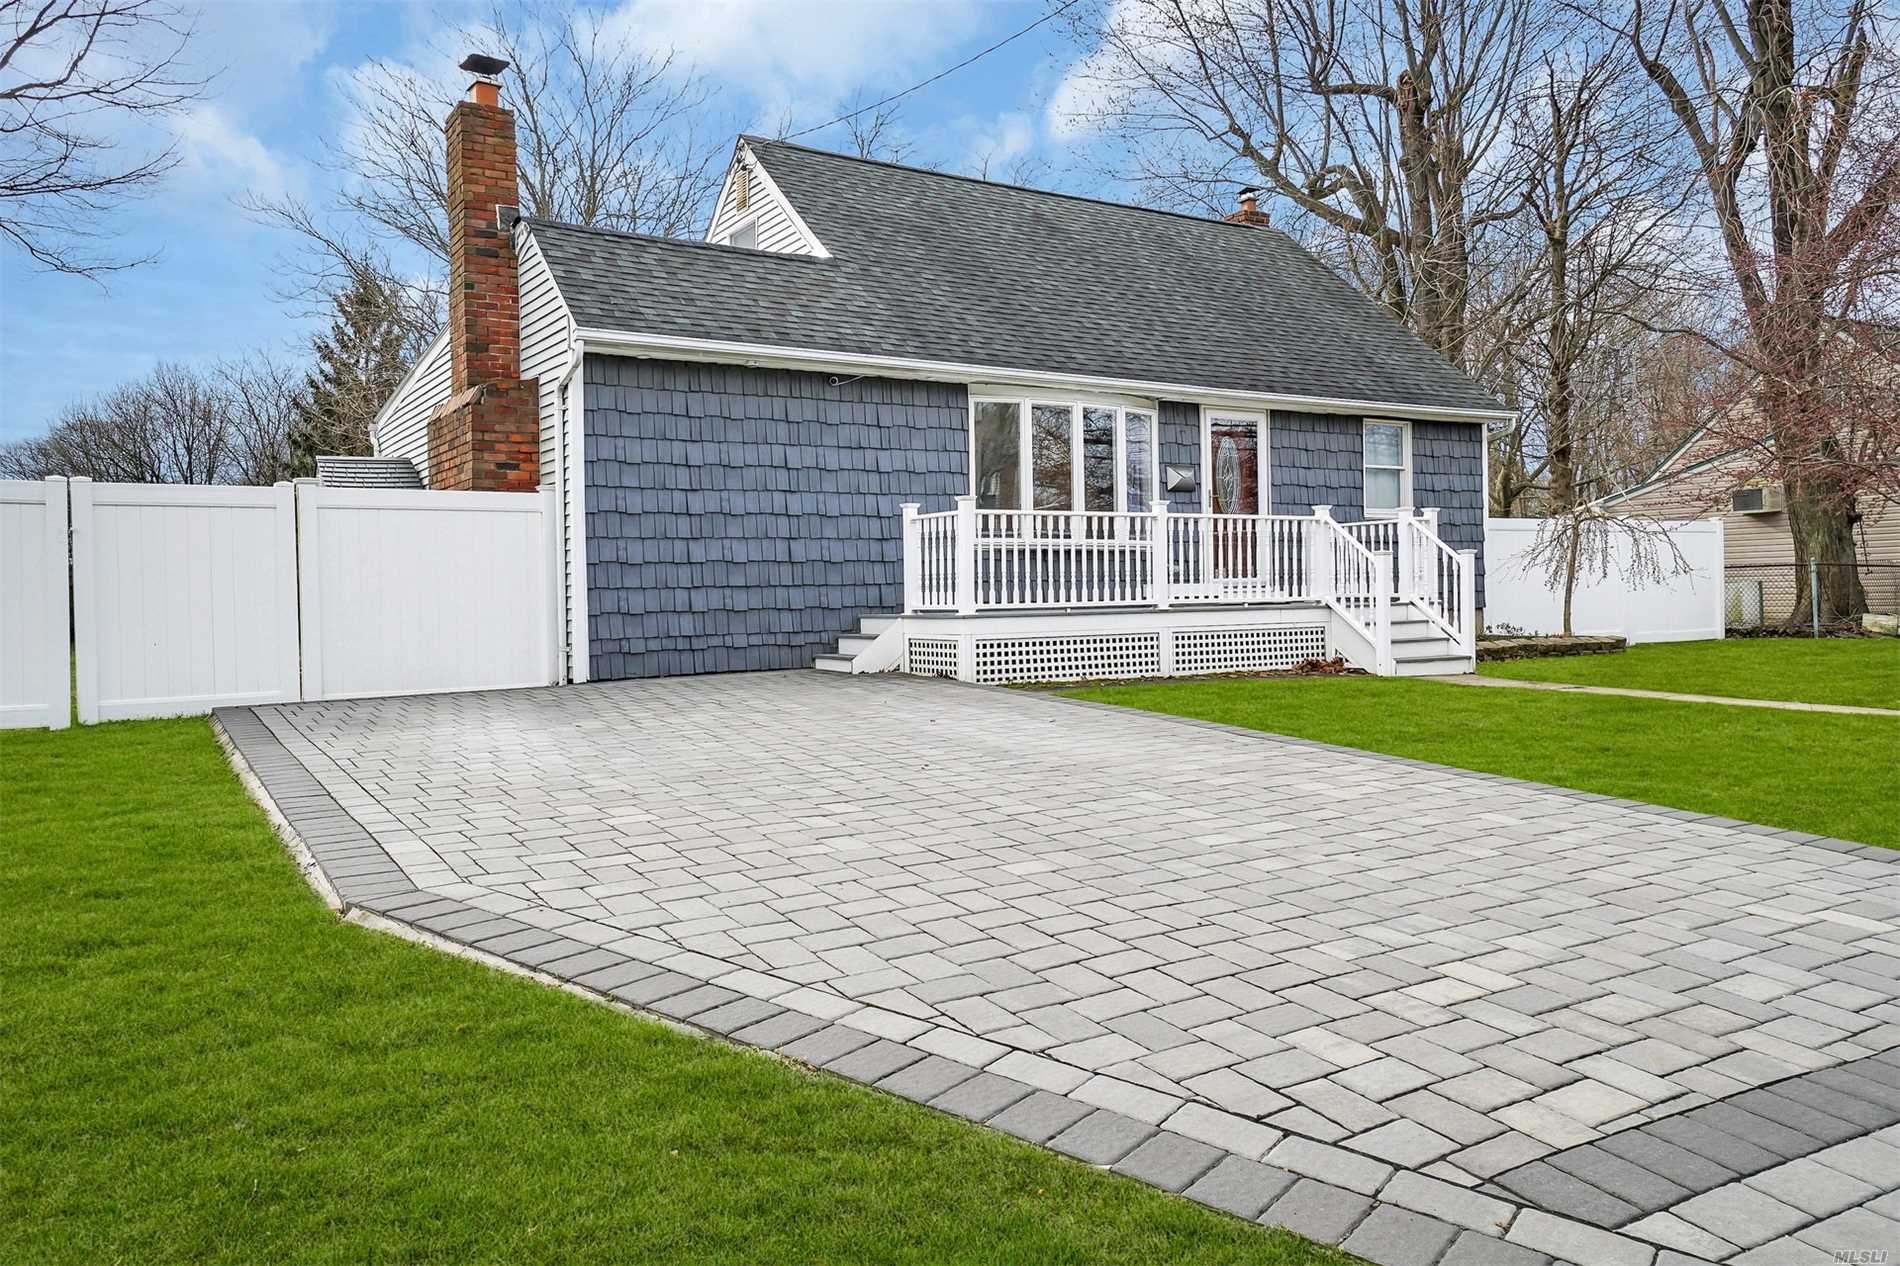 Gorgeous fully renovated in 2014 Cape Cod featuring New Kitchen with stainless steel and quartz counters, bamboo and porcelain floors, New Plumbing and Electric Throughout, 4o year Roof, CVAC, Cambridge Paver Driveway, PVC Fence, Trex Deck and Front Porch, New Sheetrock and Insulation, Fireplace insert, IG Sprinklers, Nest Connected Smart Home and so much more!- This is the one you have been waiting for!!!-